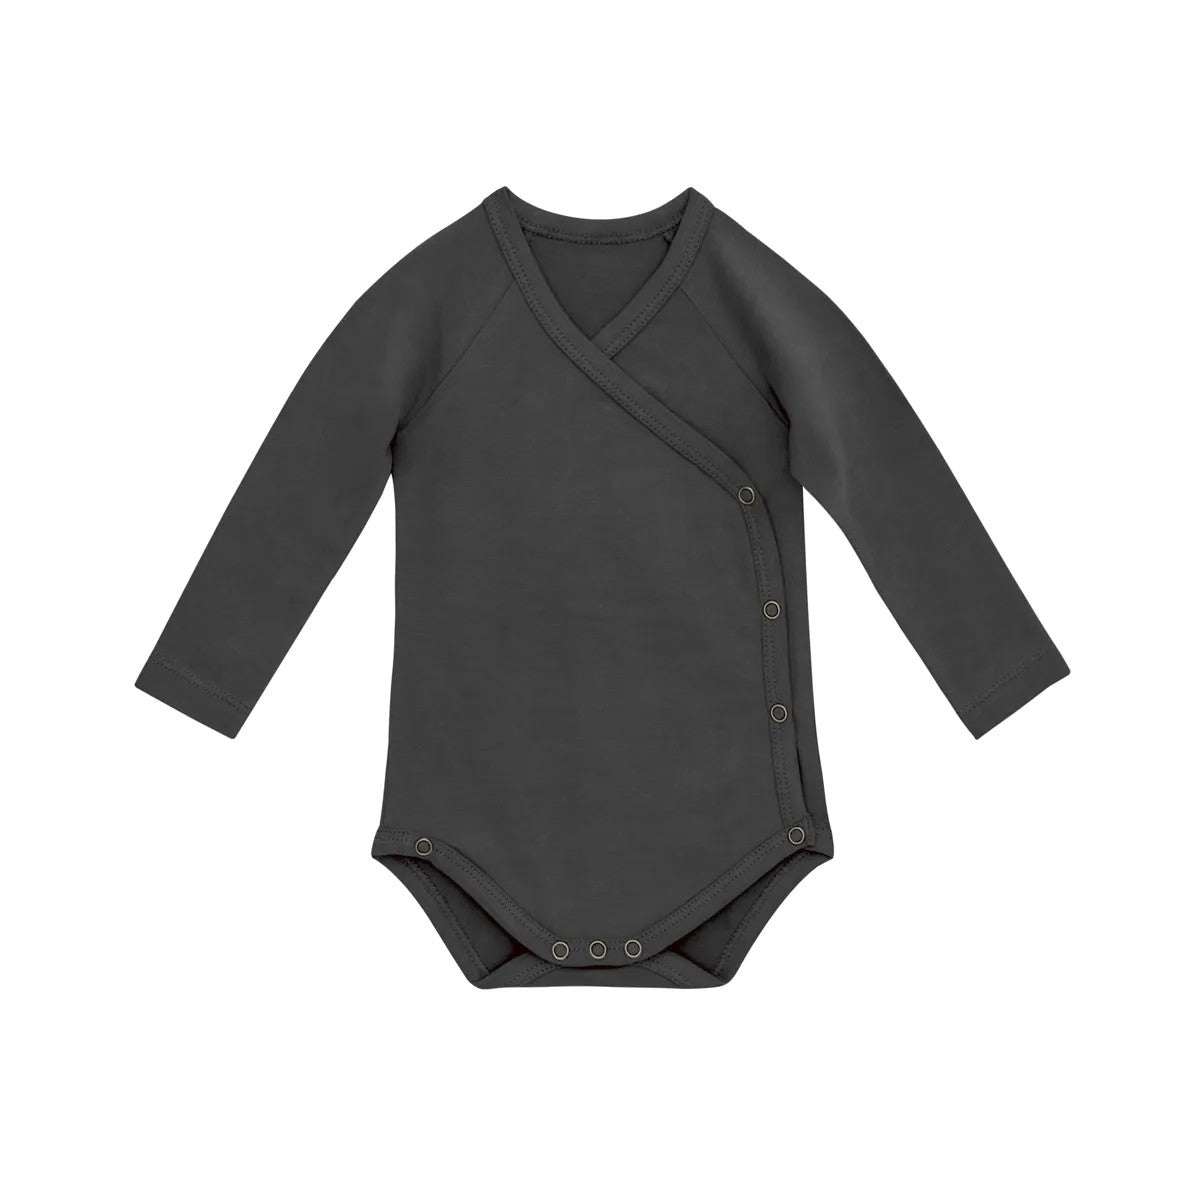 Little Hedonist unisex organic cotton baby onesie (body / romper) made from our signature organic cotton in anthracite grey color.